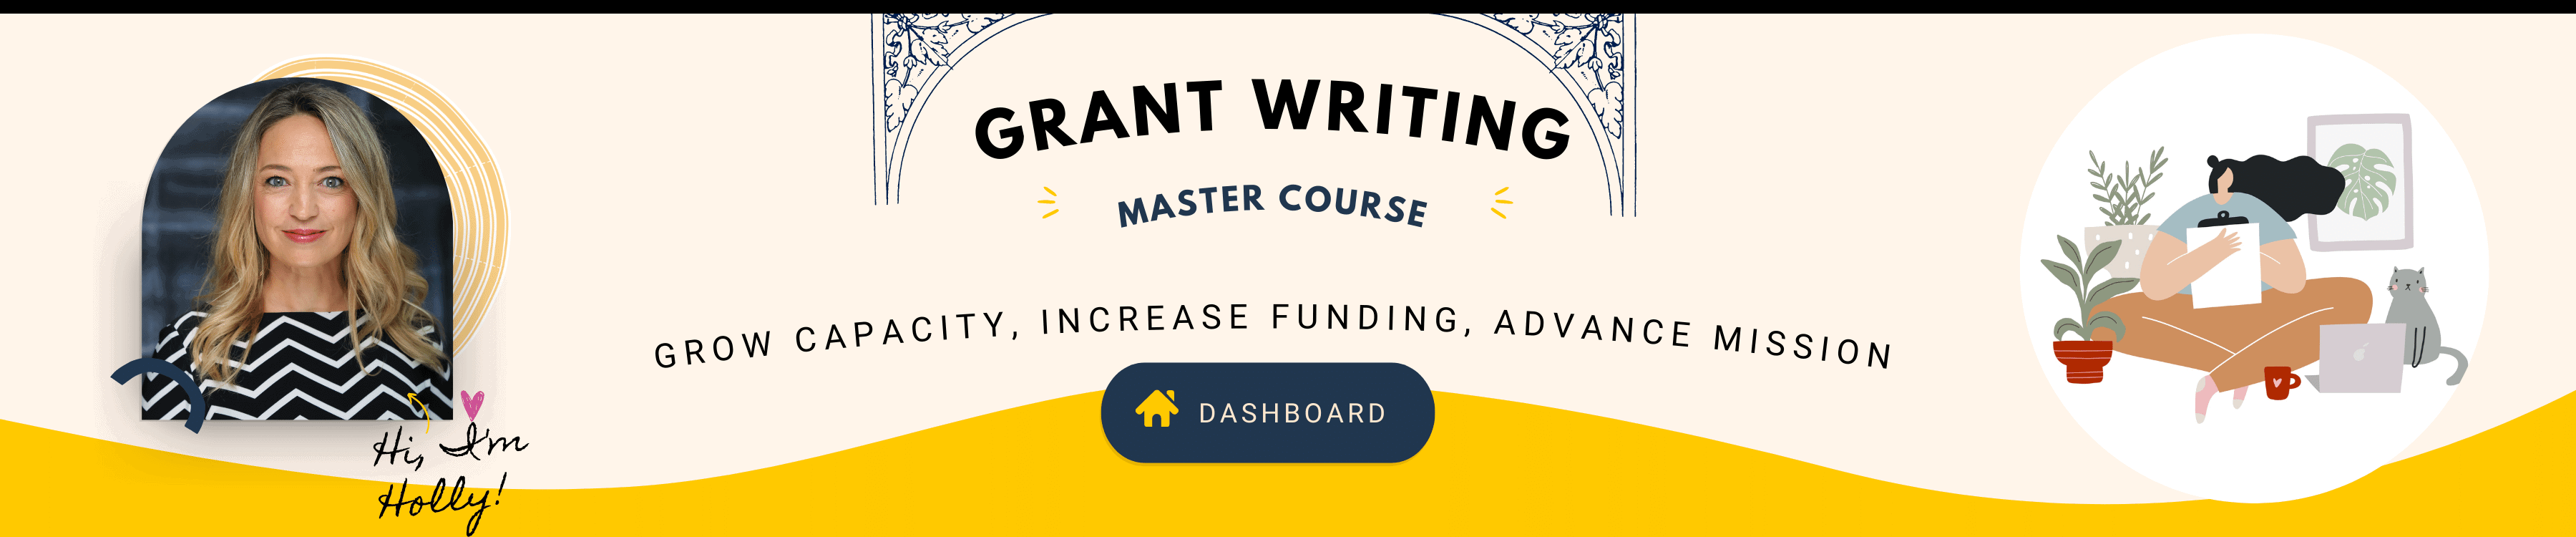 Grant writing online course